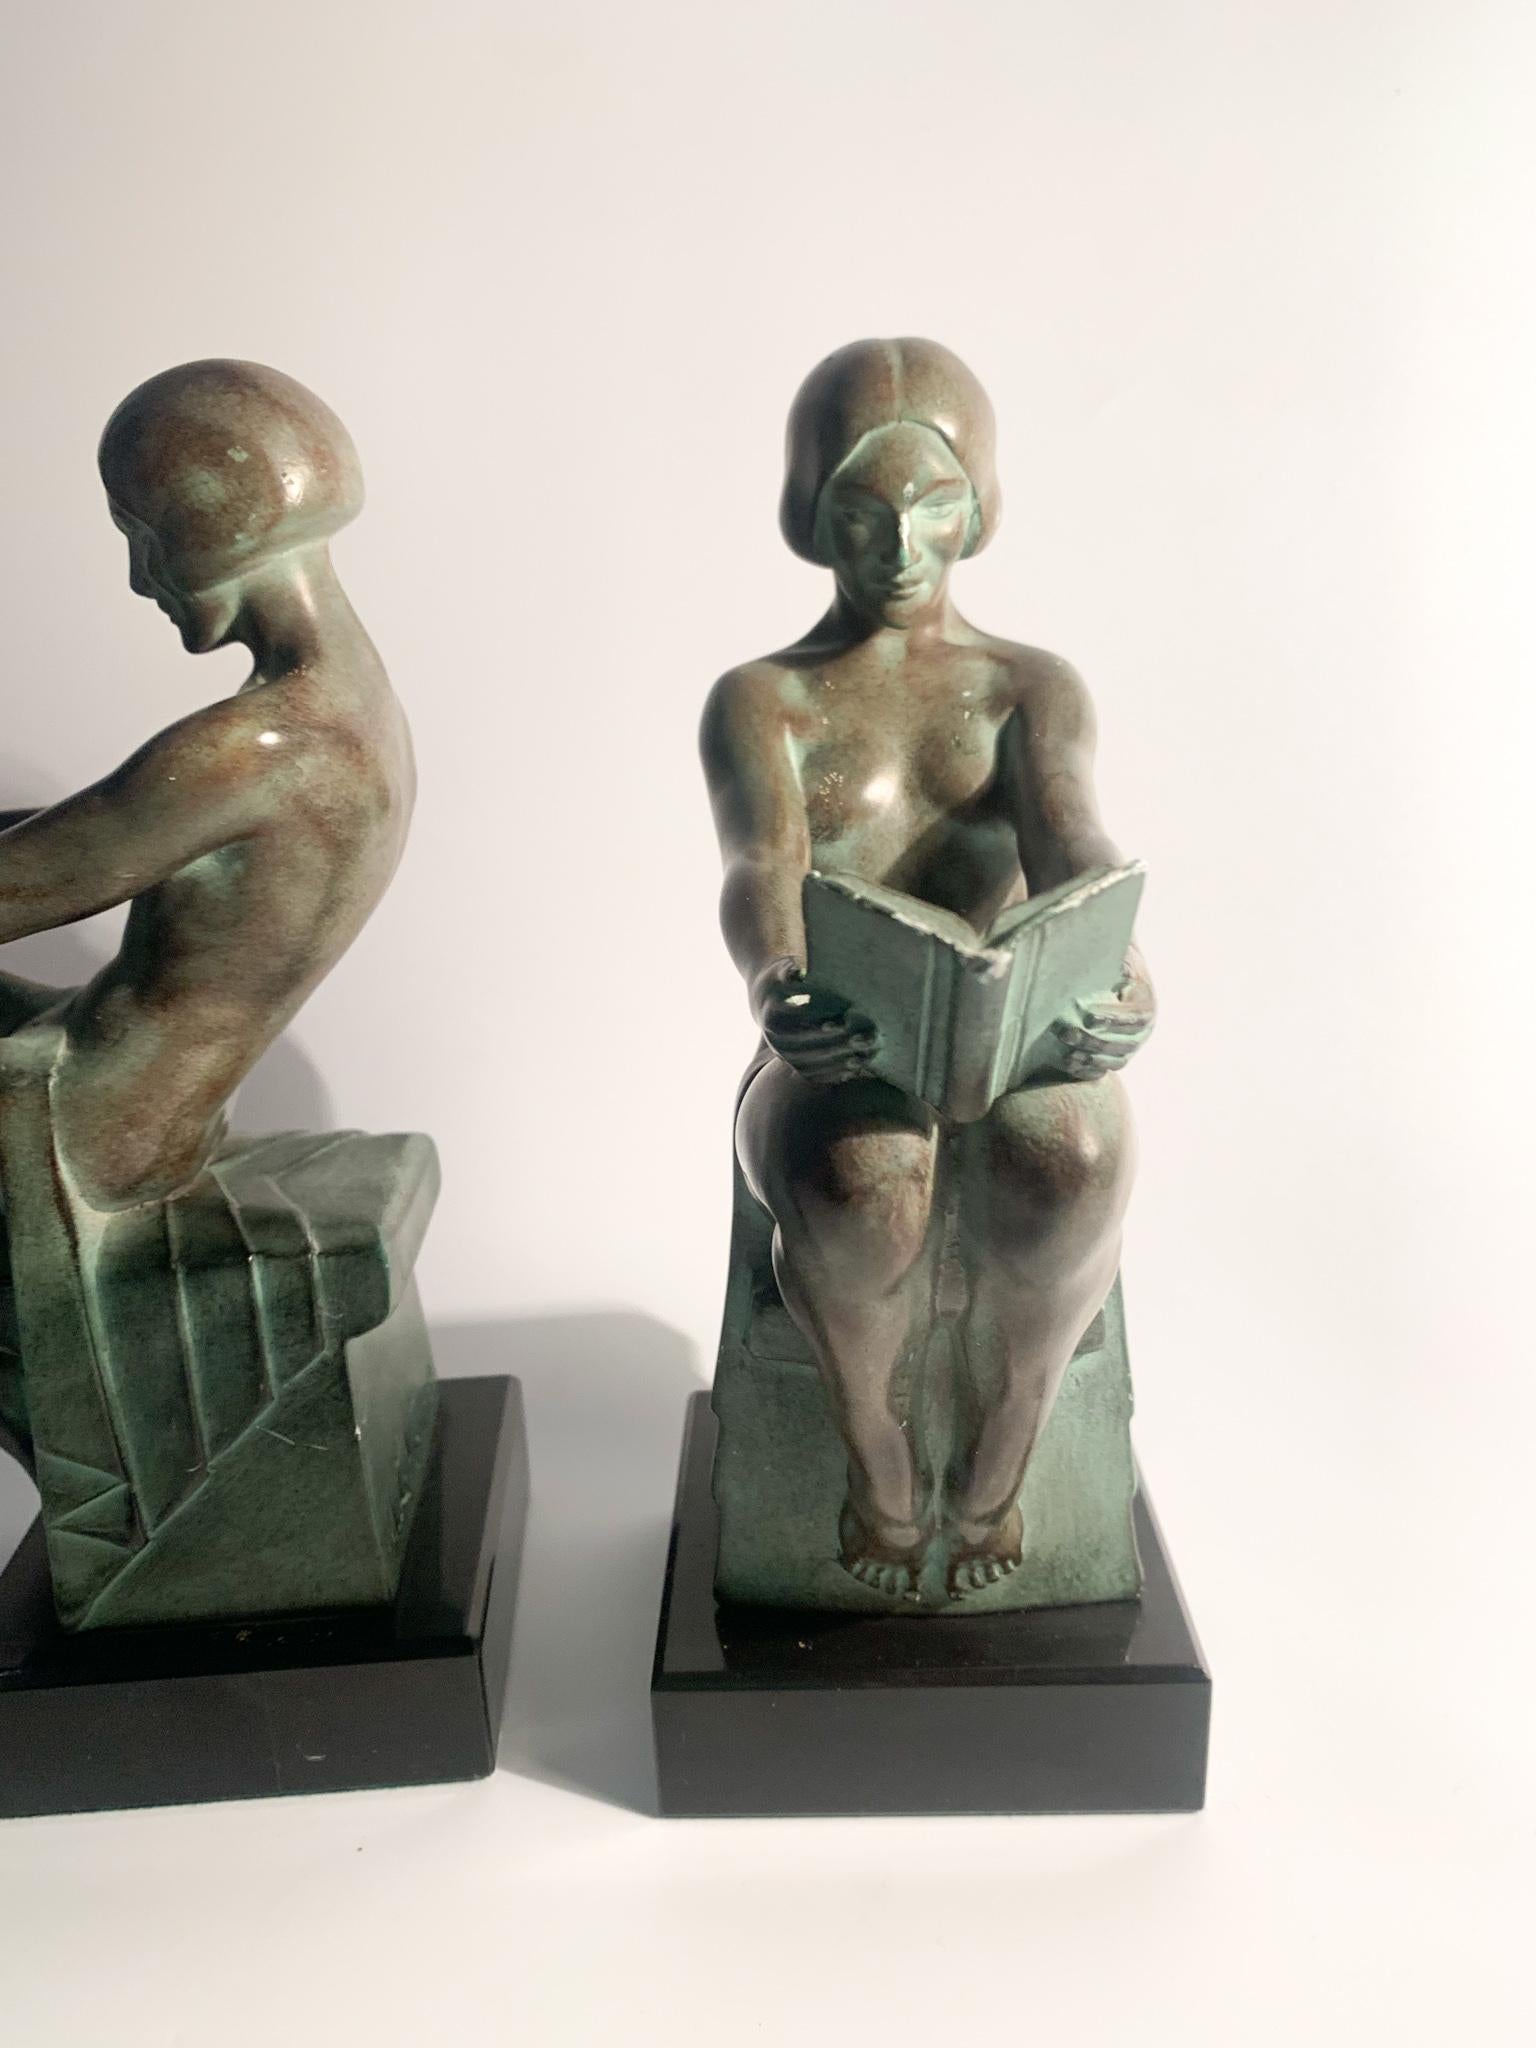 Pair Art Deco Bookends in Artistic Metal by Max Le Verrier from the 1930s 3